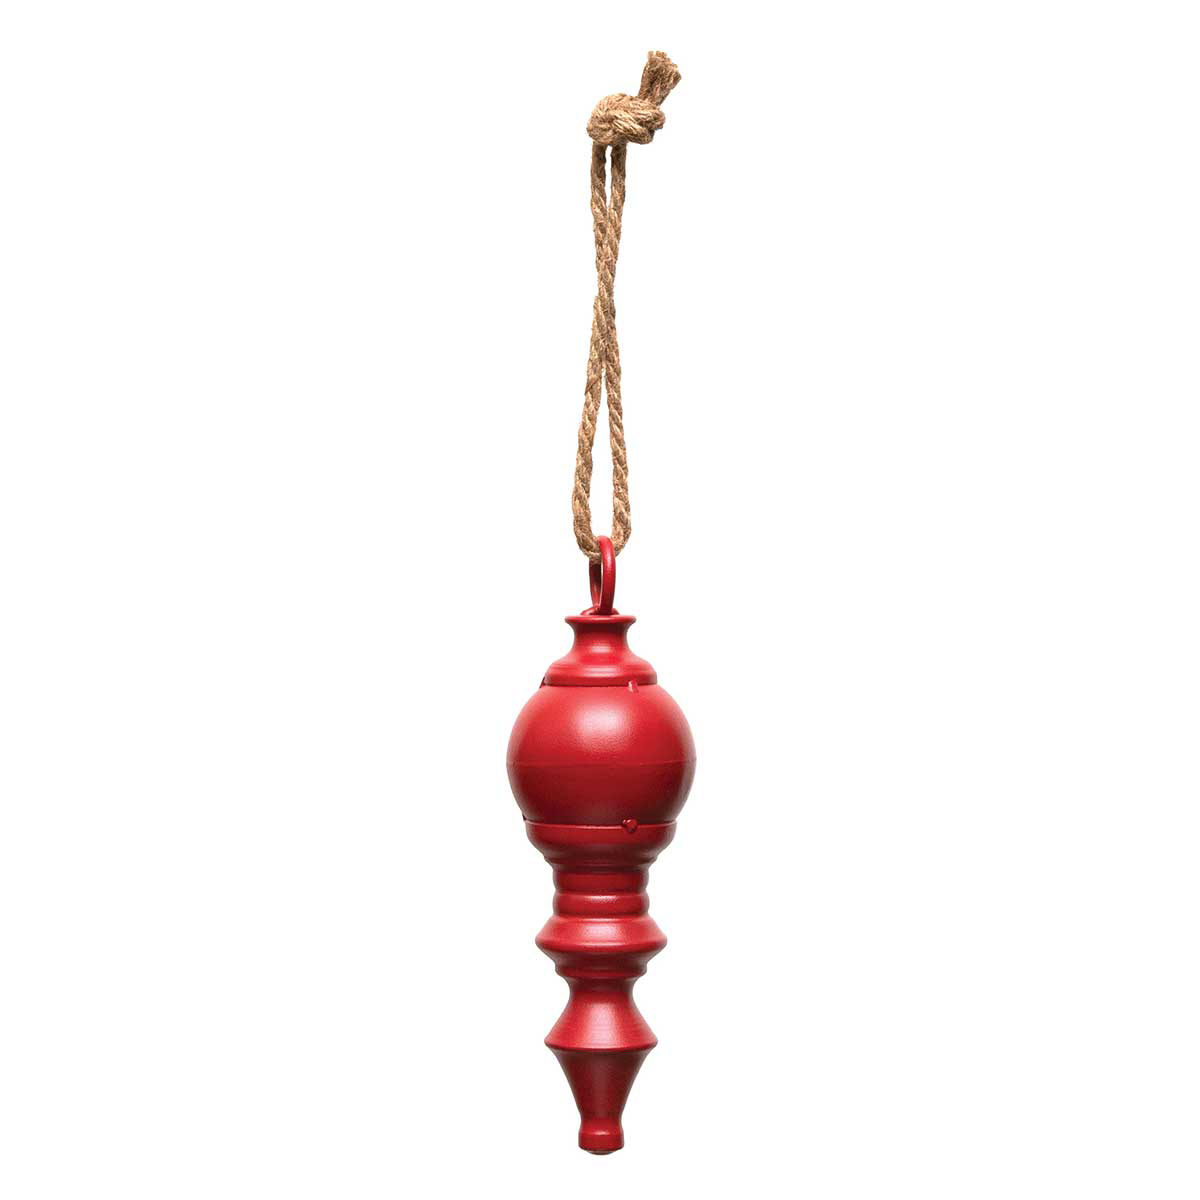 ORNAMENT FINIAL MATTE RED SMALL 2.75IN X 9IN METAL